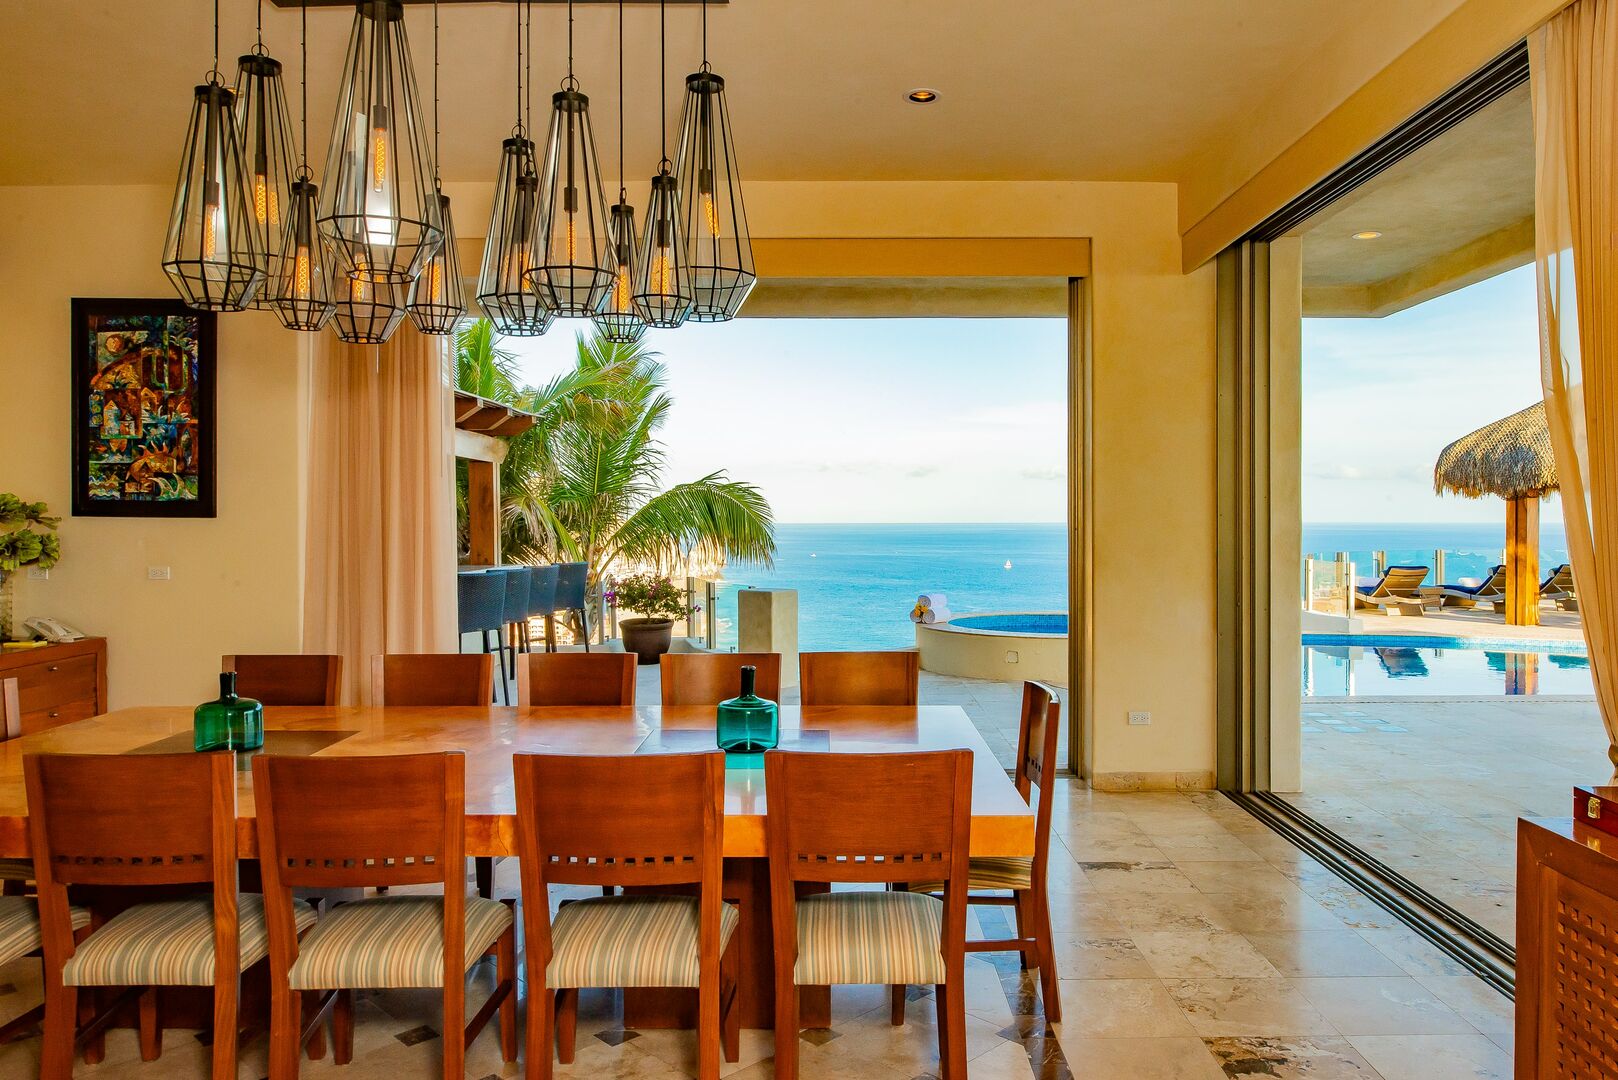 A view of the ocean from the dining room table in this Los Cabos villa.